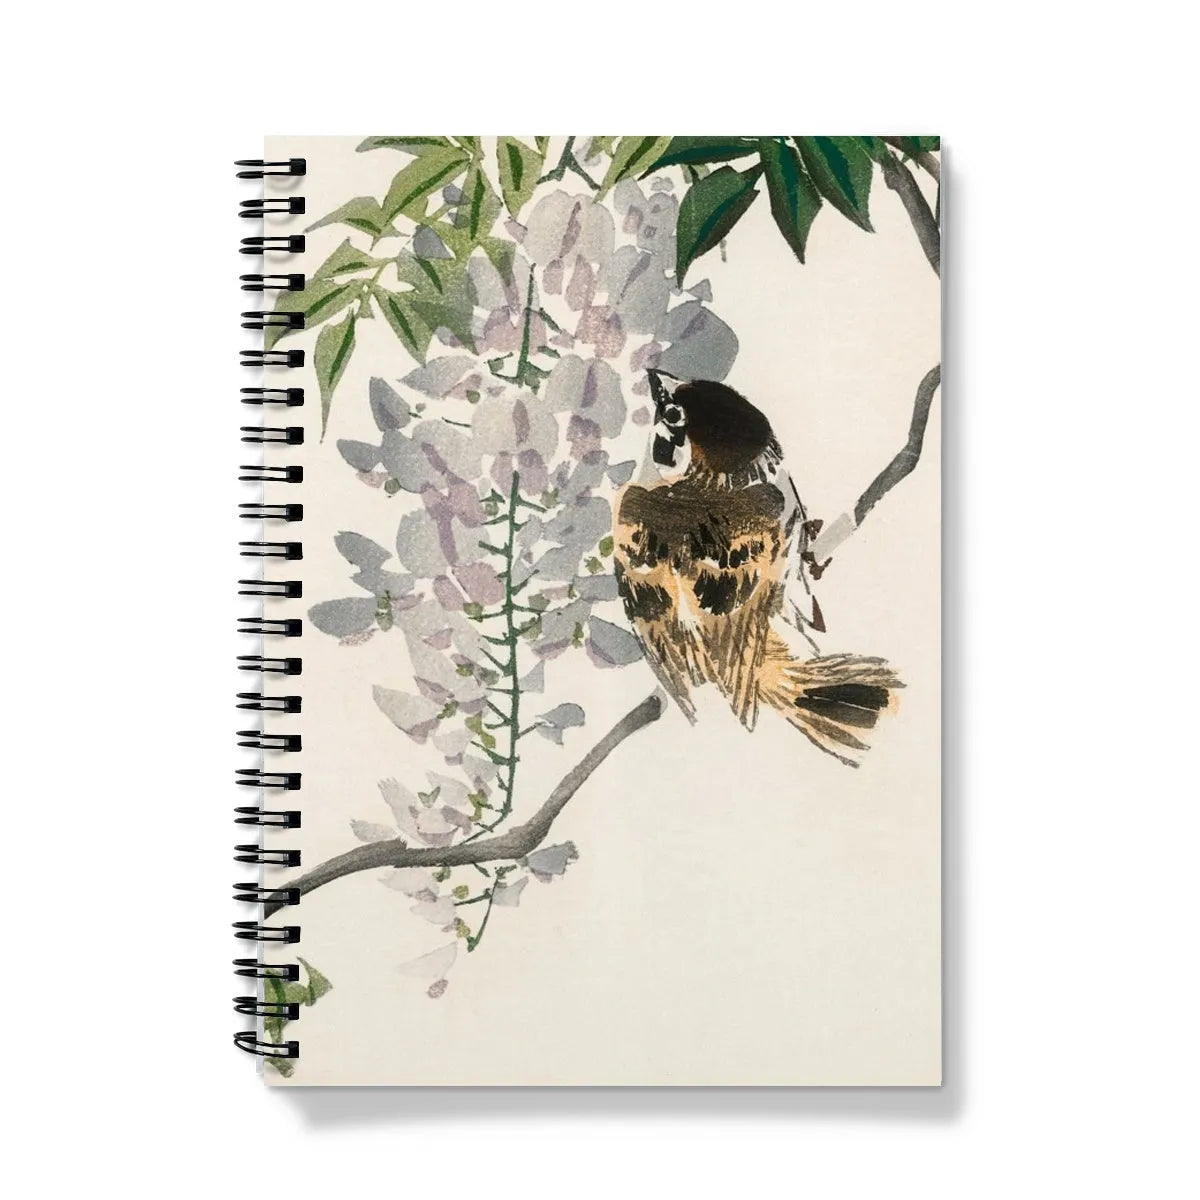 Sparrow On a Branch By Kōno Bairei Notebook - A5 / Graph - Notebooks & Notepads - Aesthetic Art